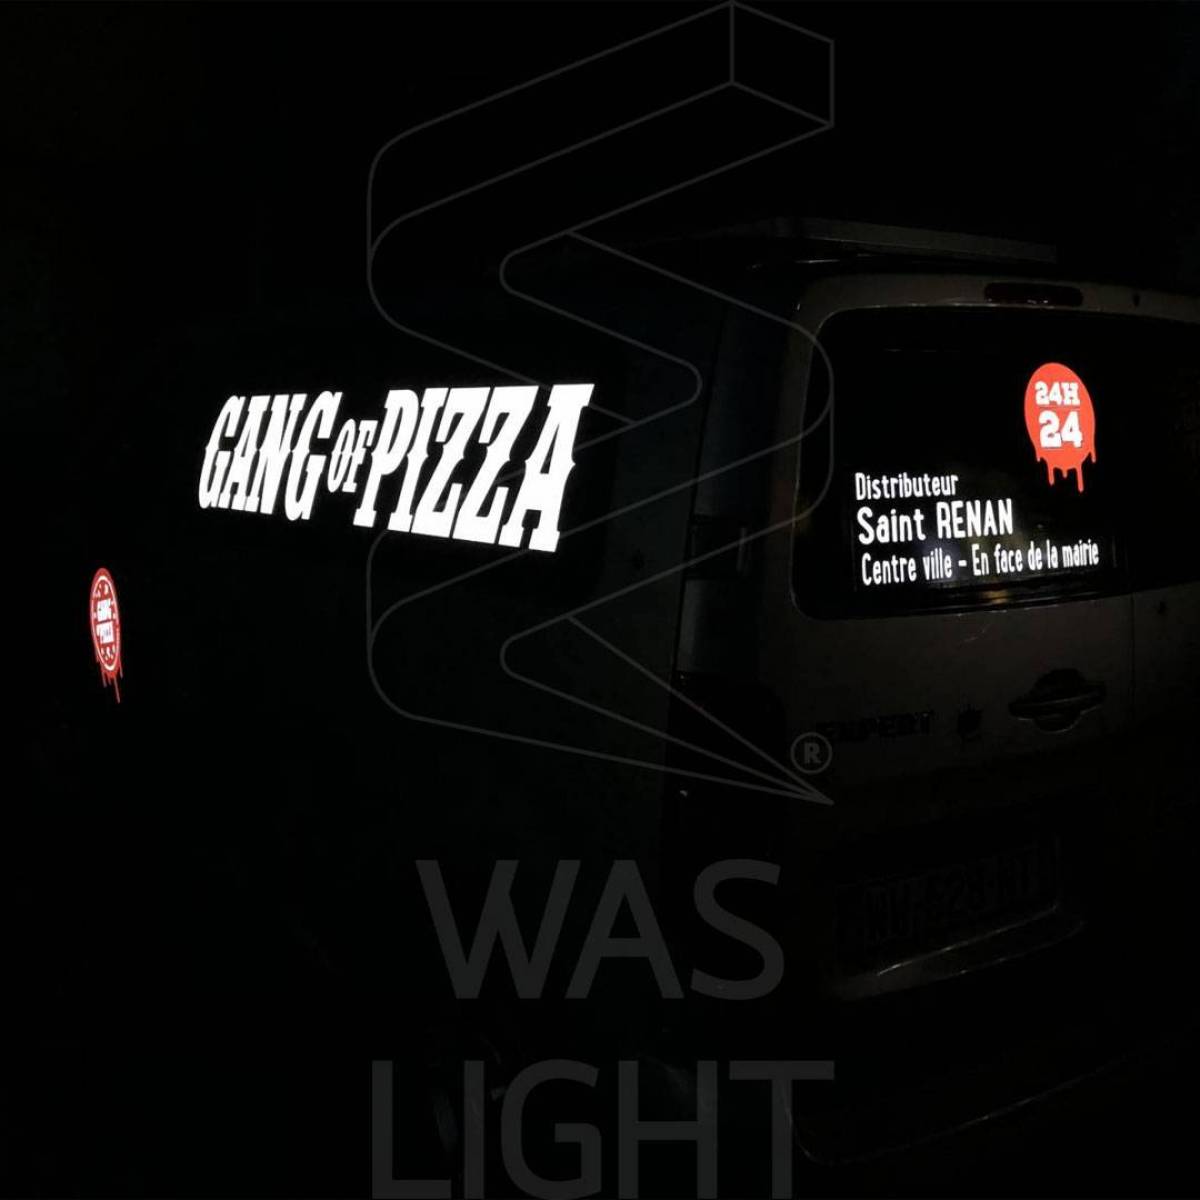 Covering électroluminescent véhicule Gang of Pizza Bretagne